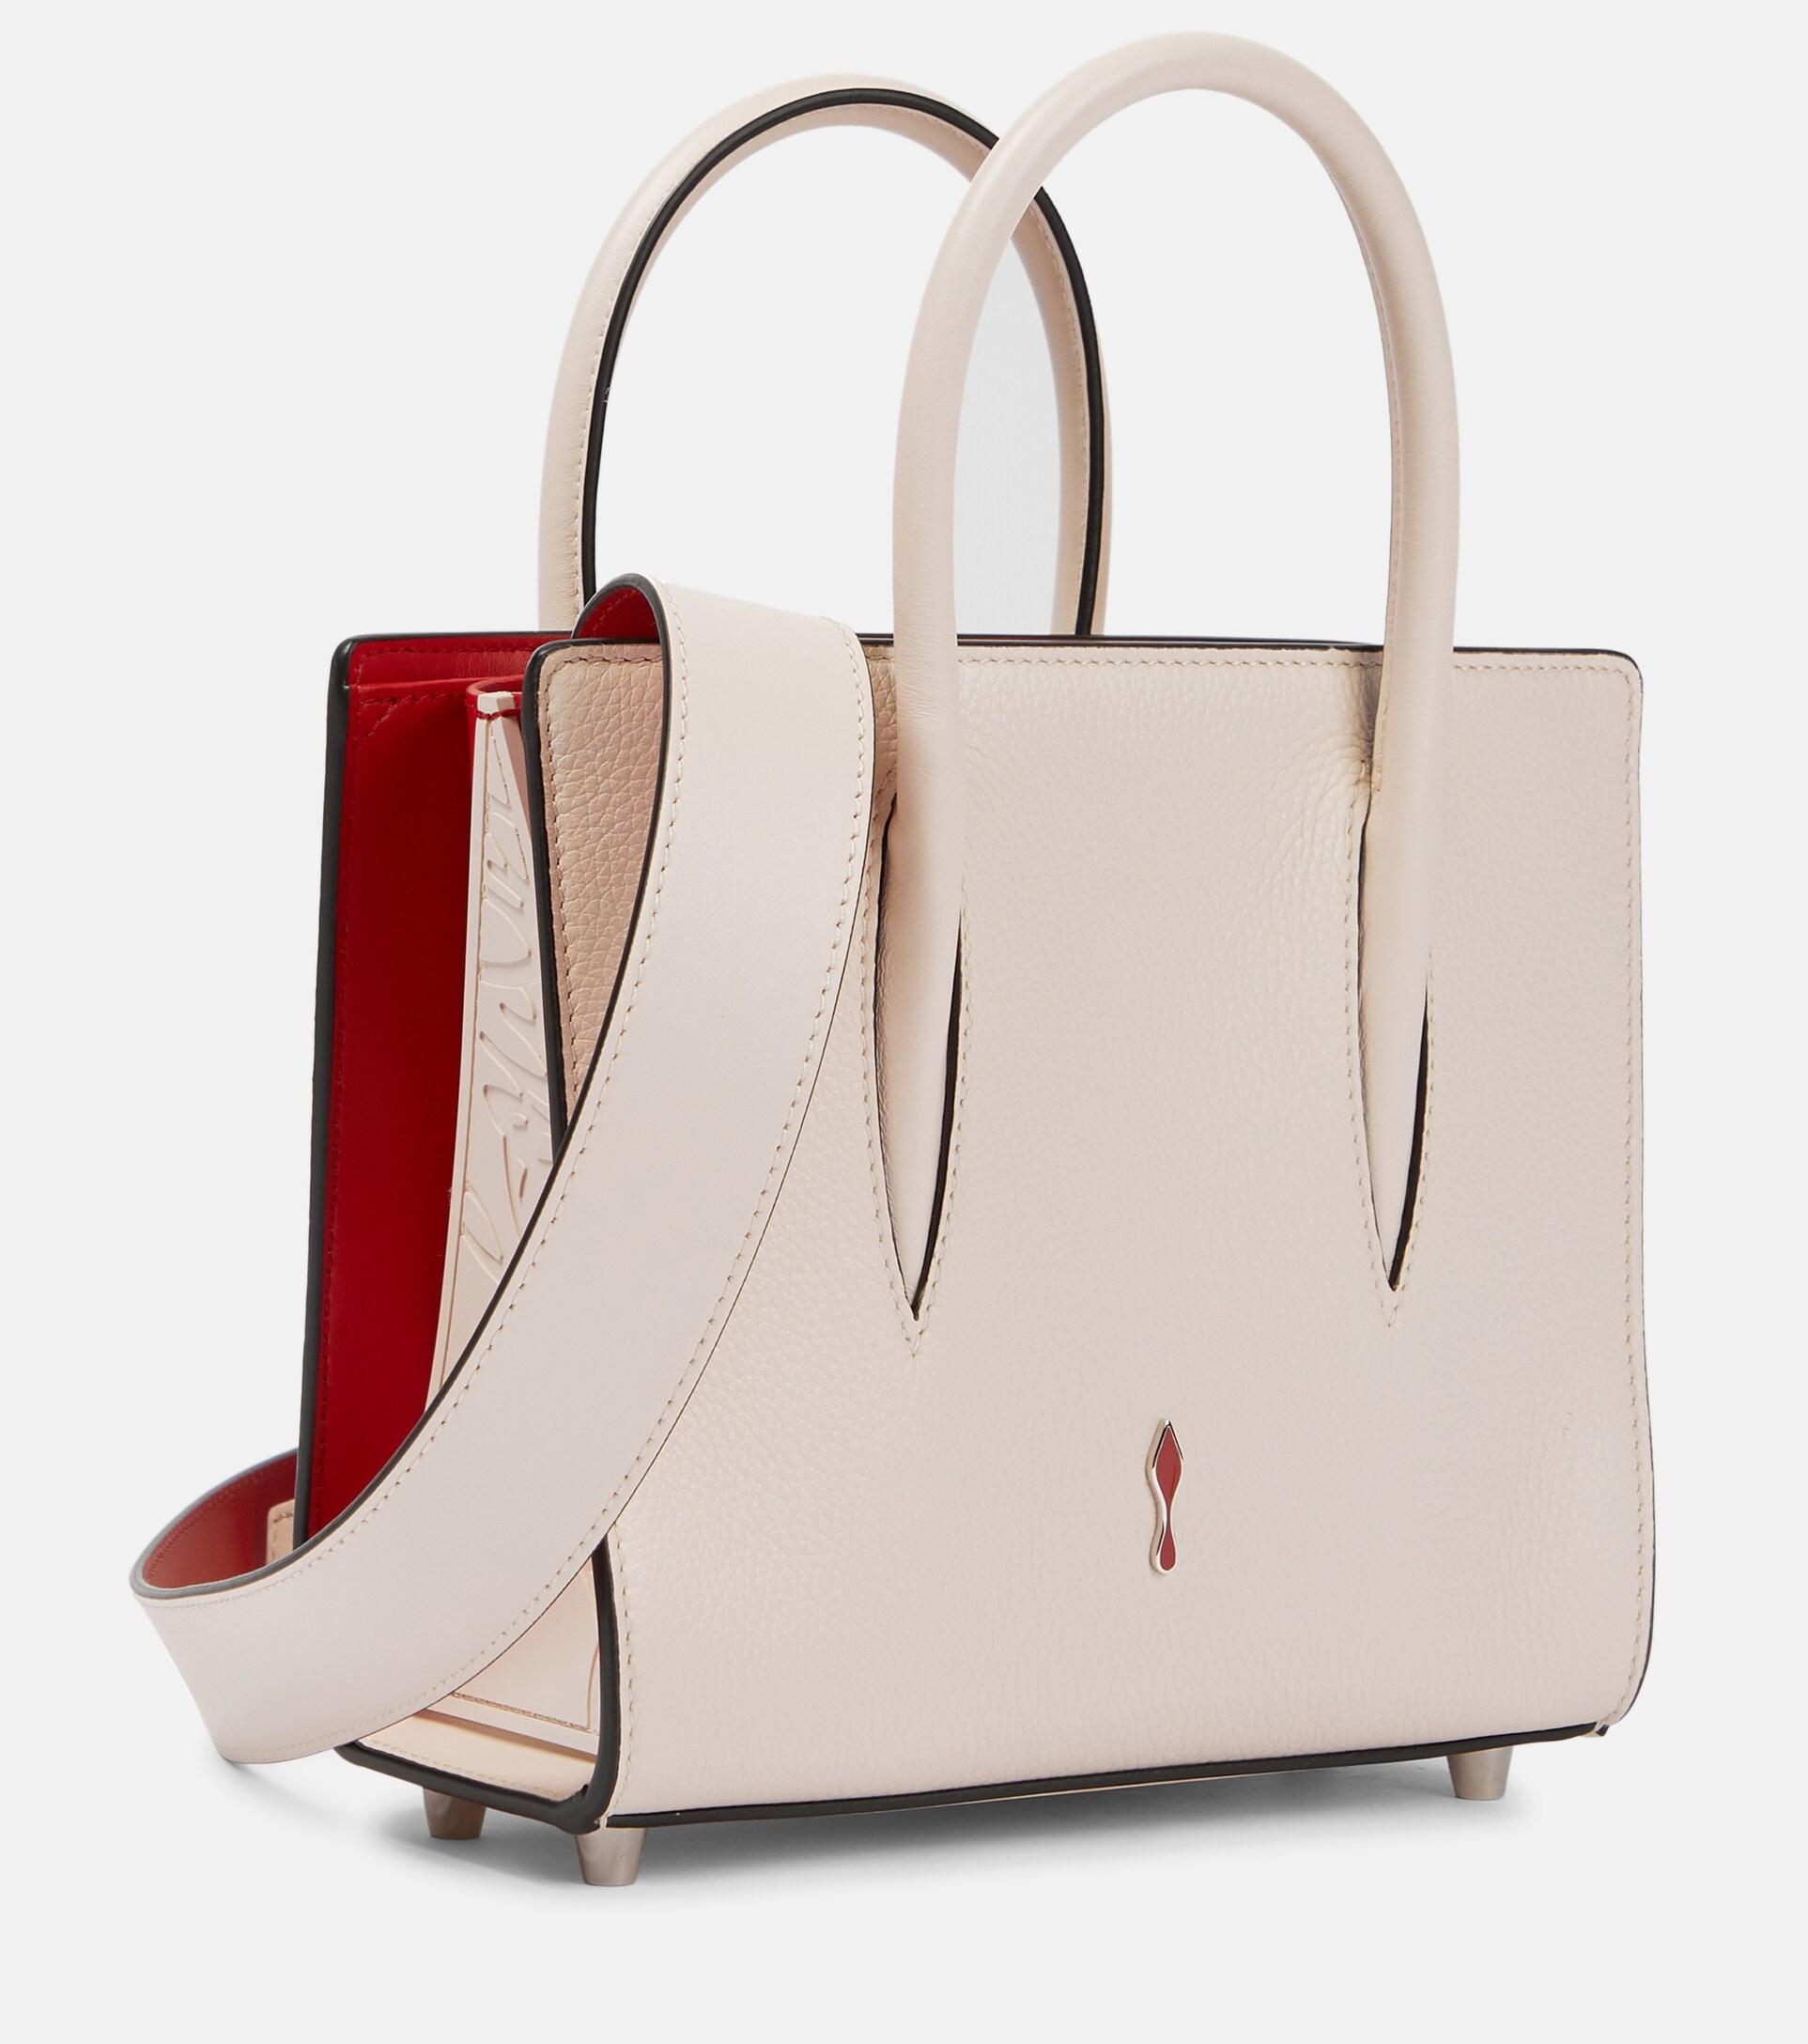 Christian Louboutin Paloma Small Leather Tote in Natural